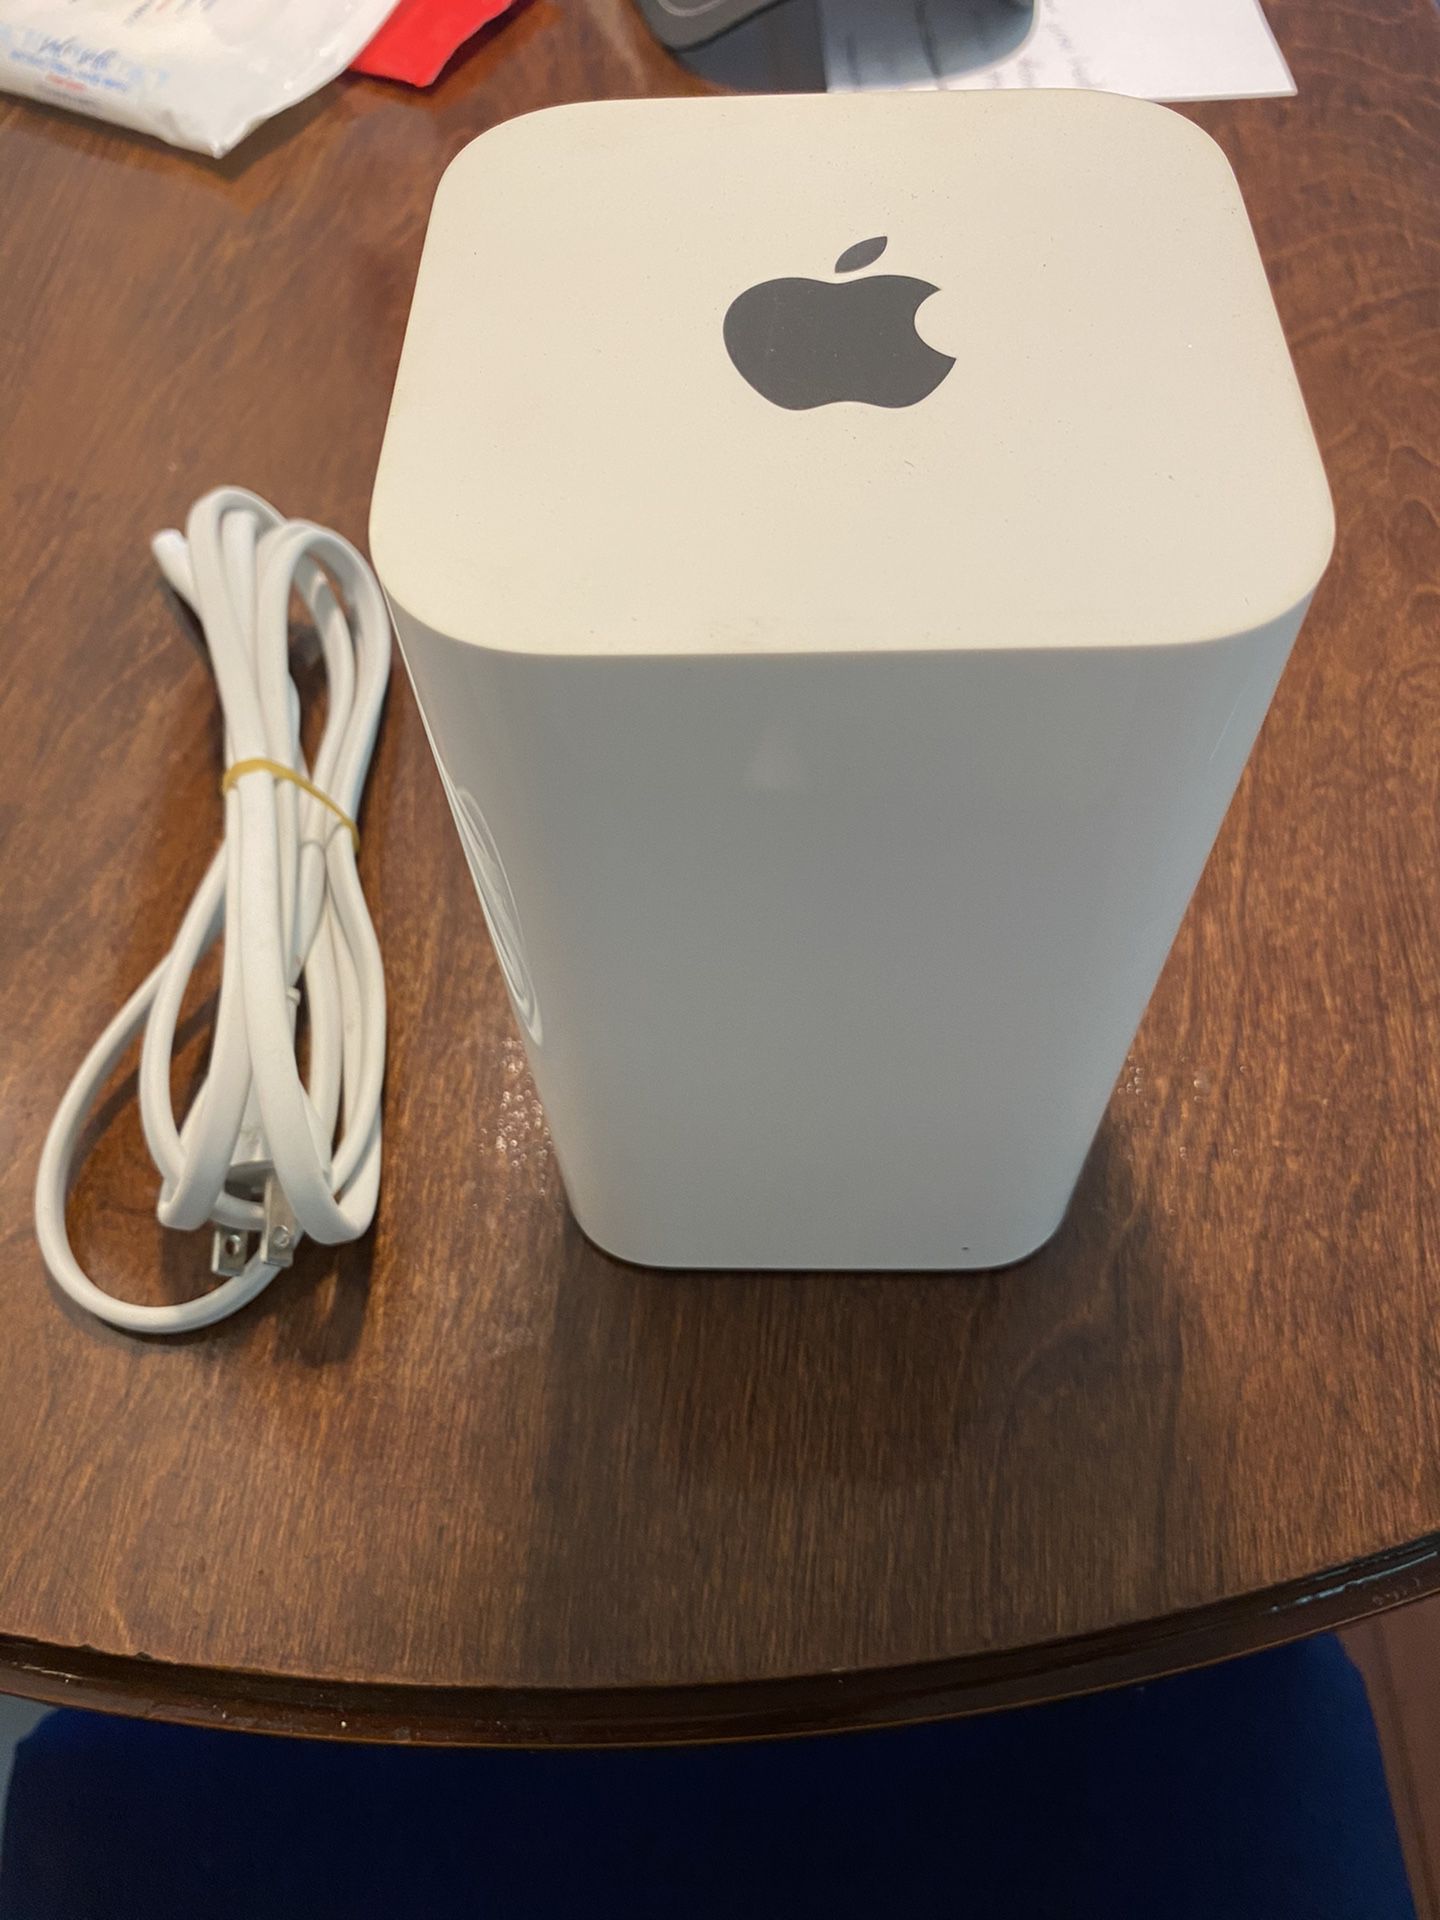 AirPort Extreme A 1521